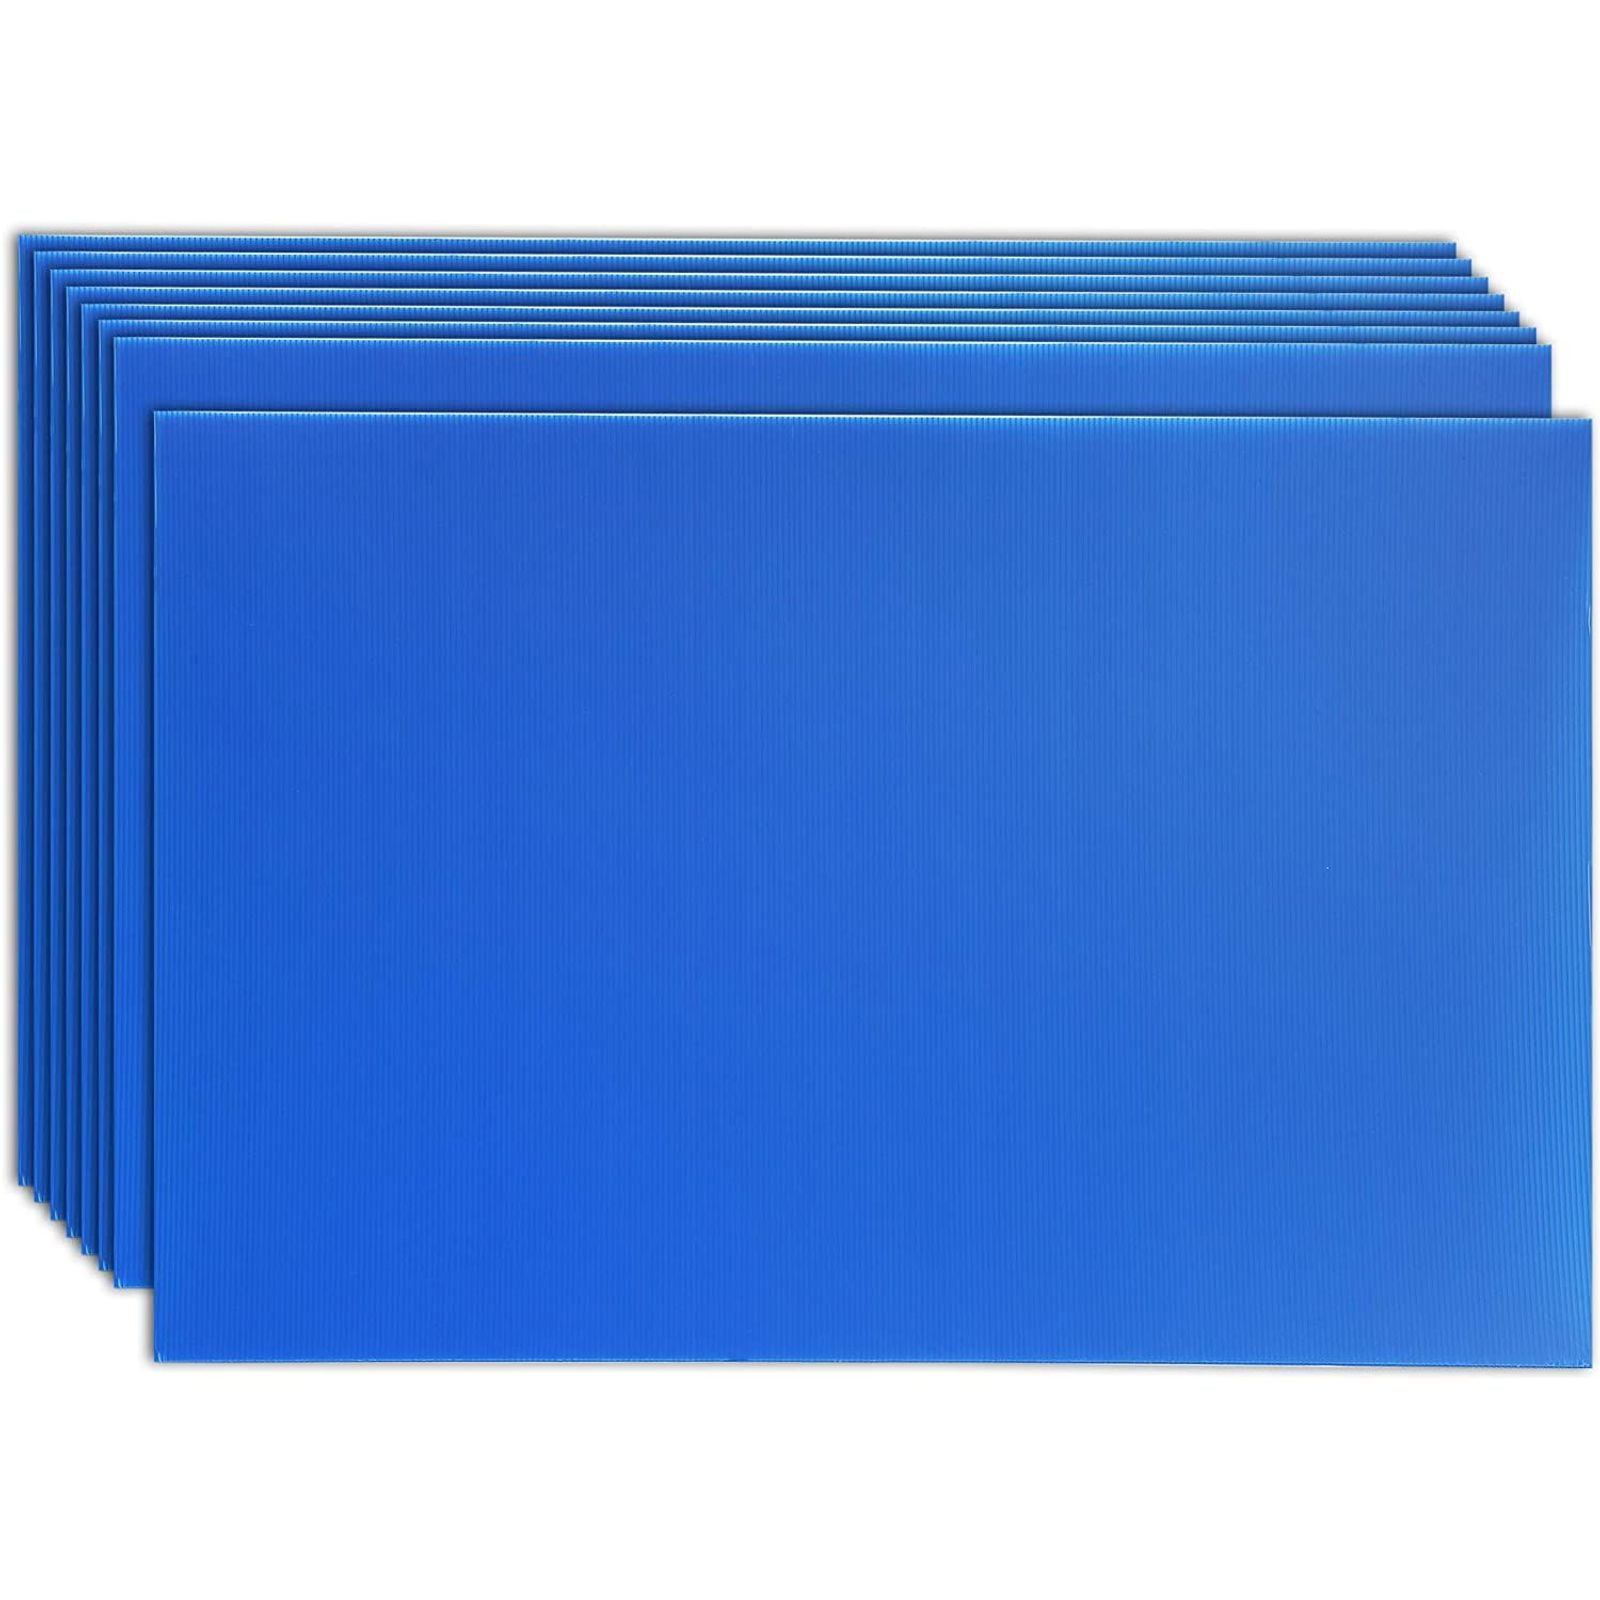 Details about   8-Pack Blank Corrugated Plastic Yard Lawn Signs Sheets Board Blue 24x36"